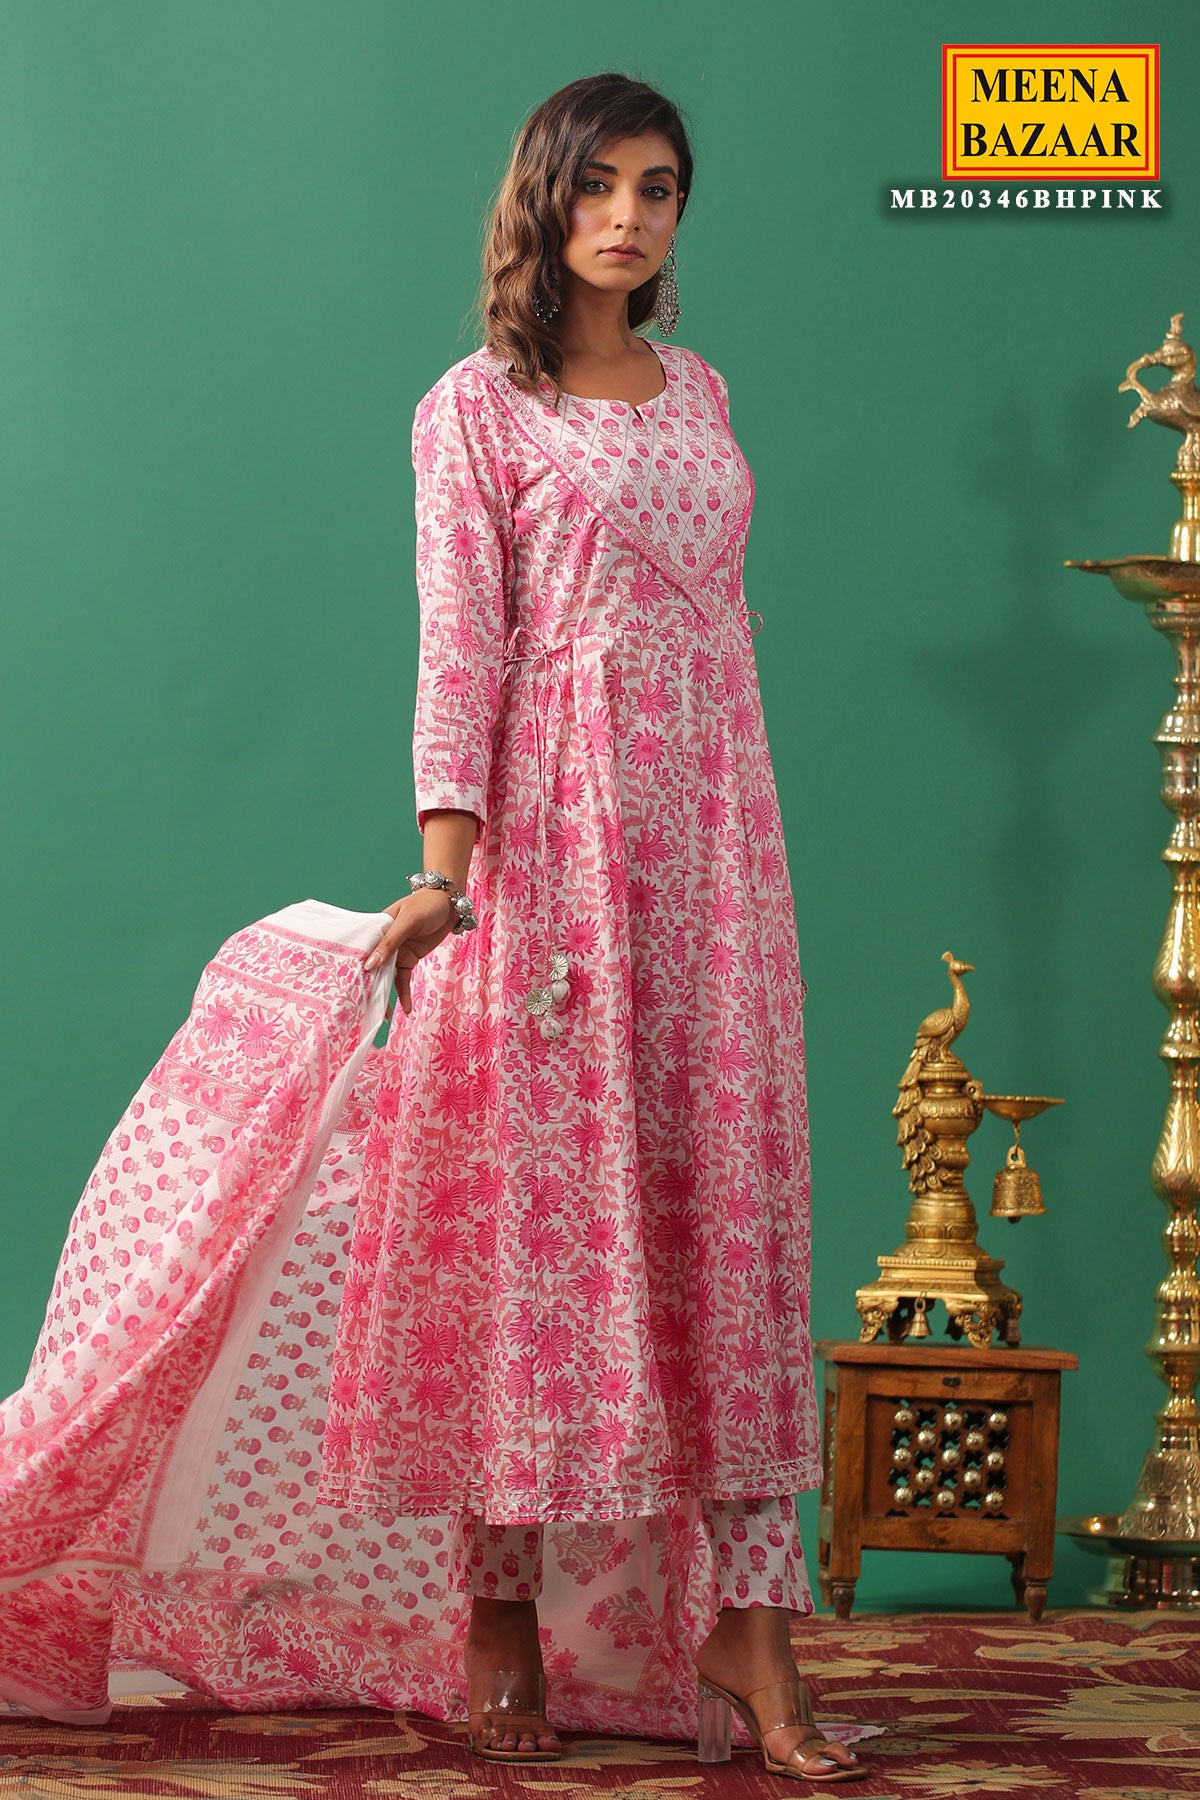 Pink Cotton Floral Printed Thread and Zari Embroidered Suit